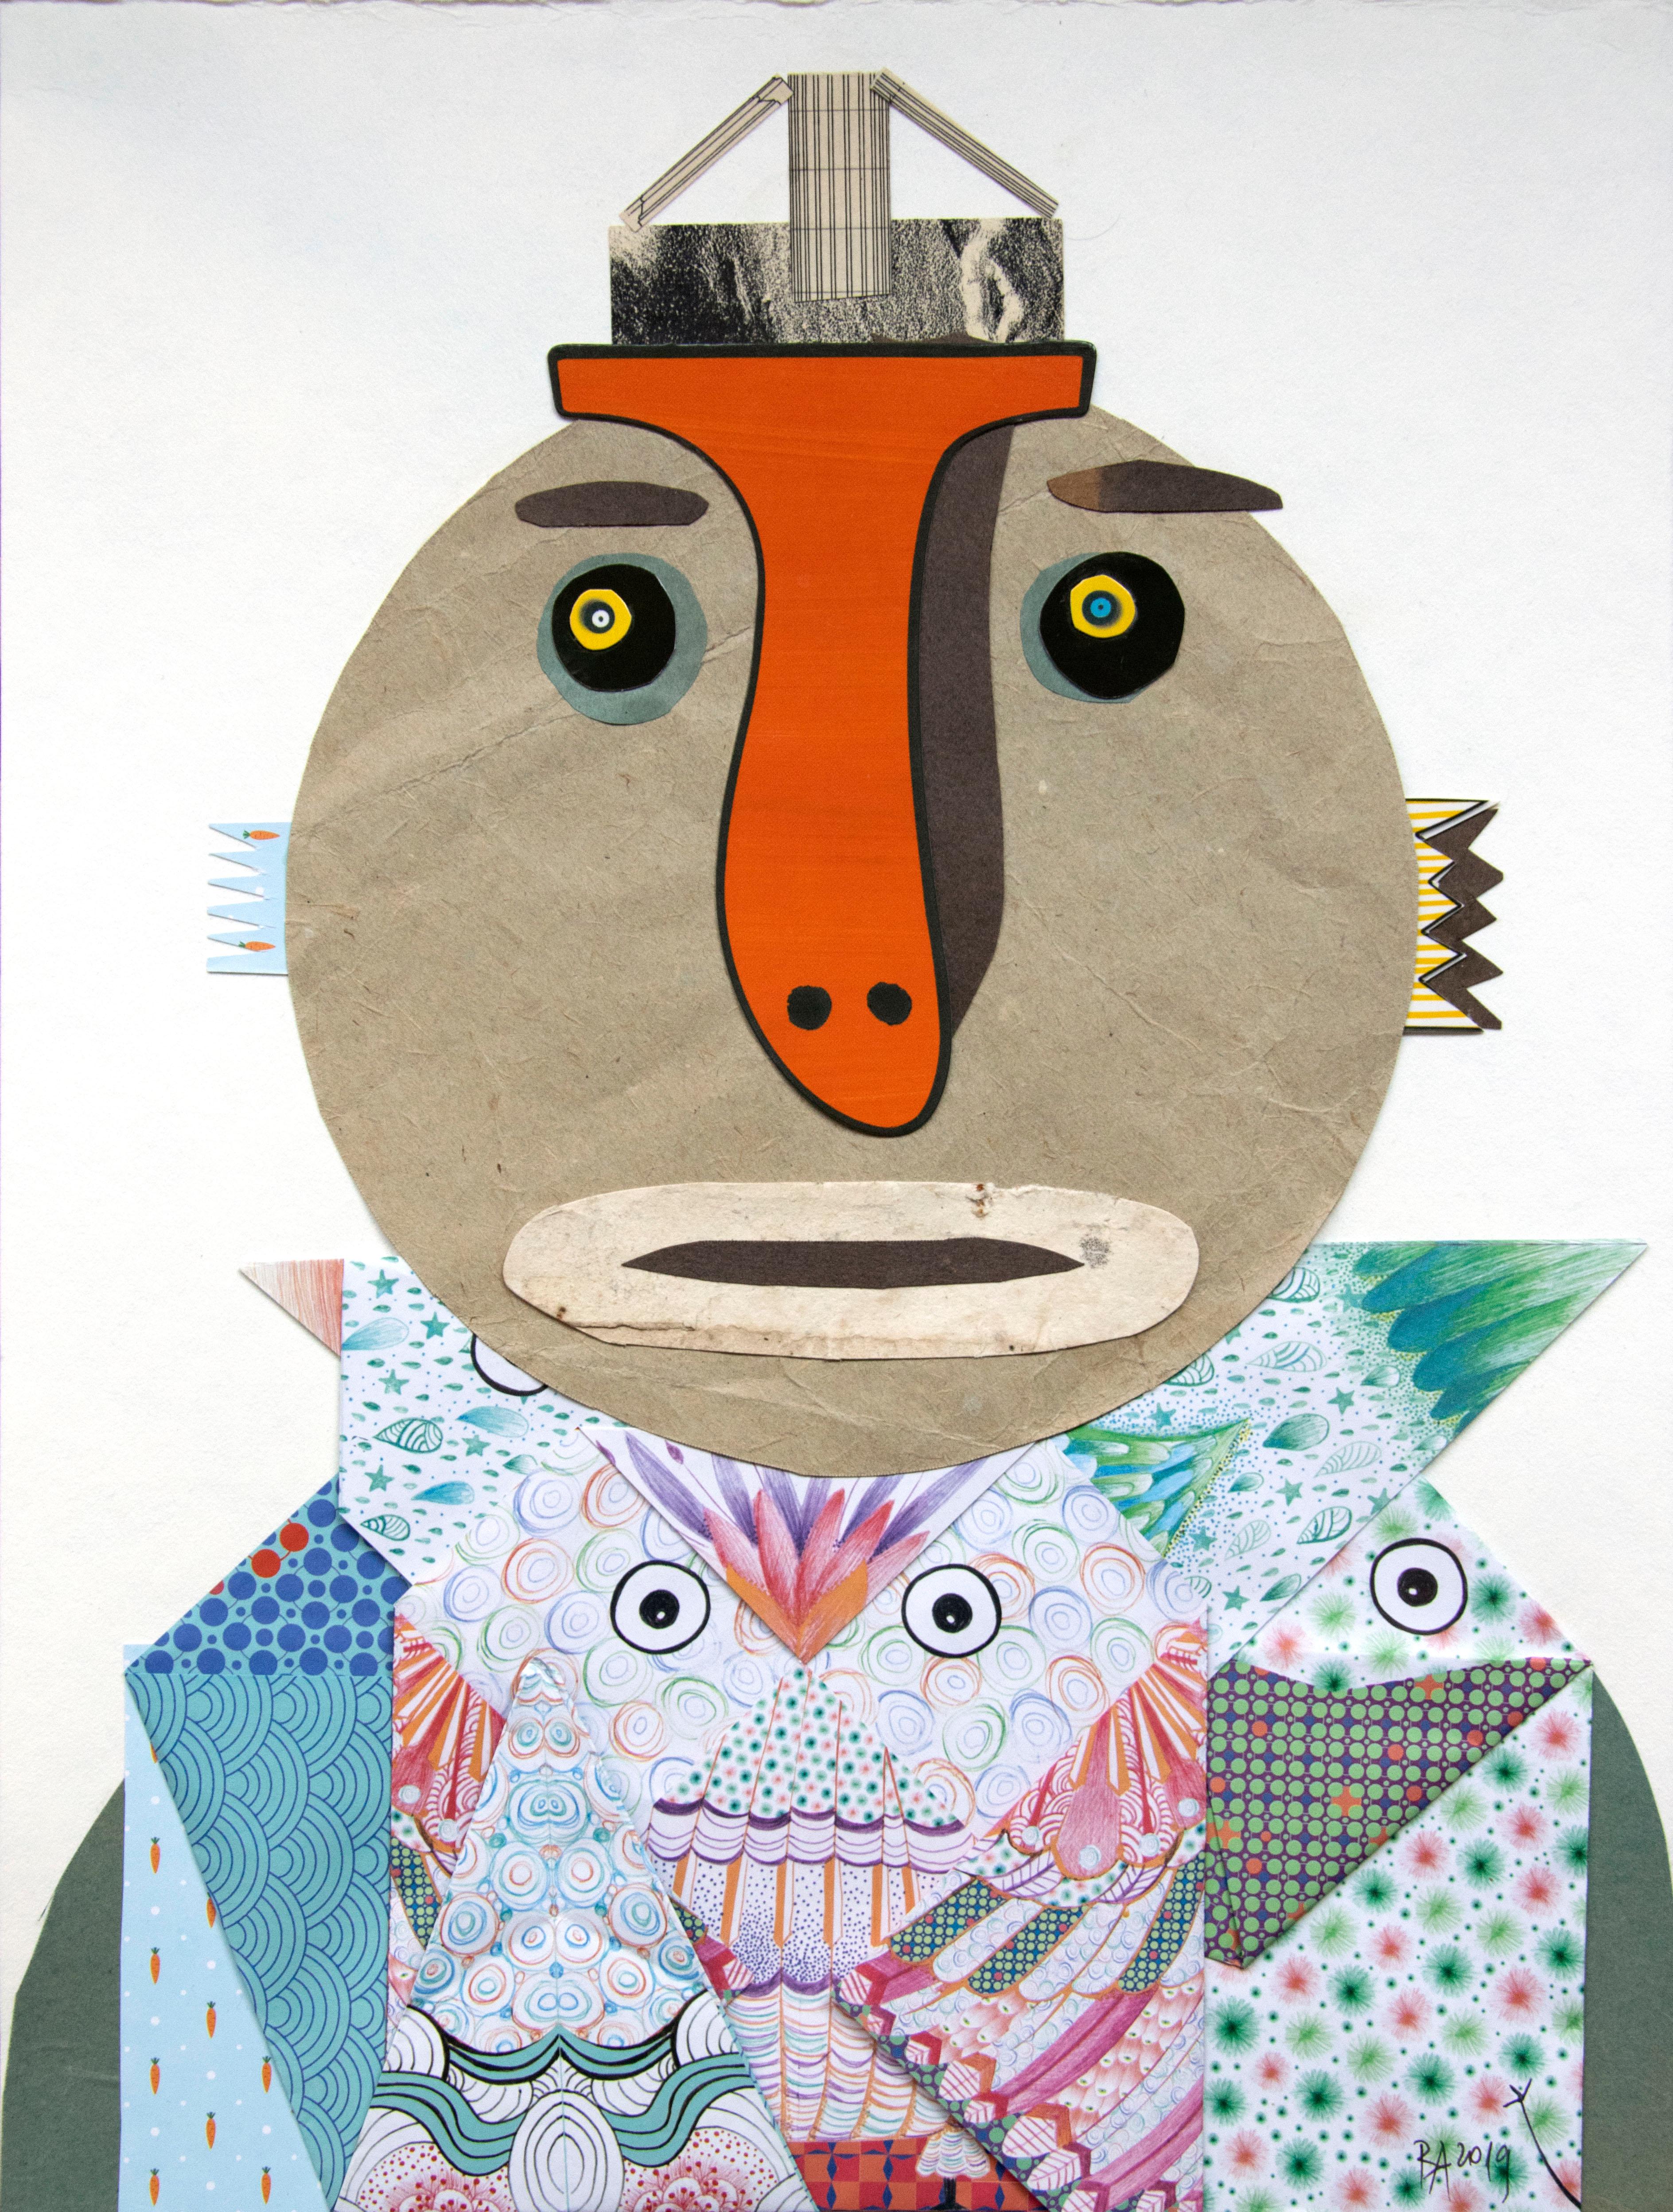 The Origami Seller - Contemporary Art, Collage, Orange, Funny, 21st Century